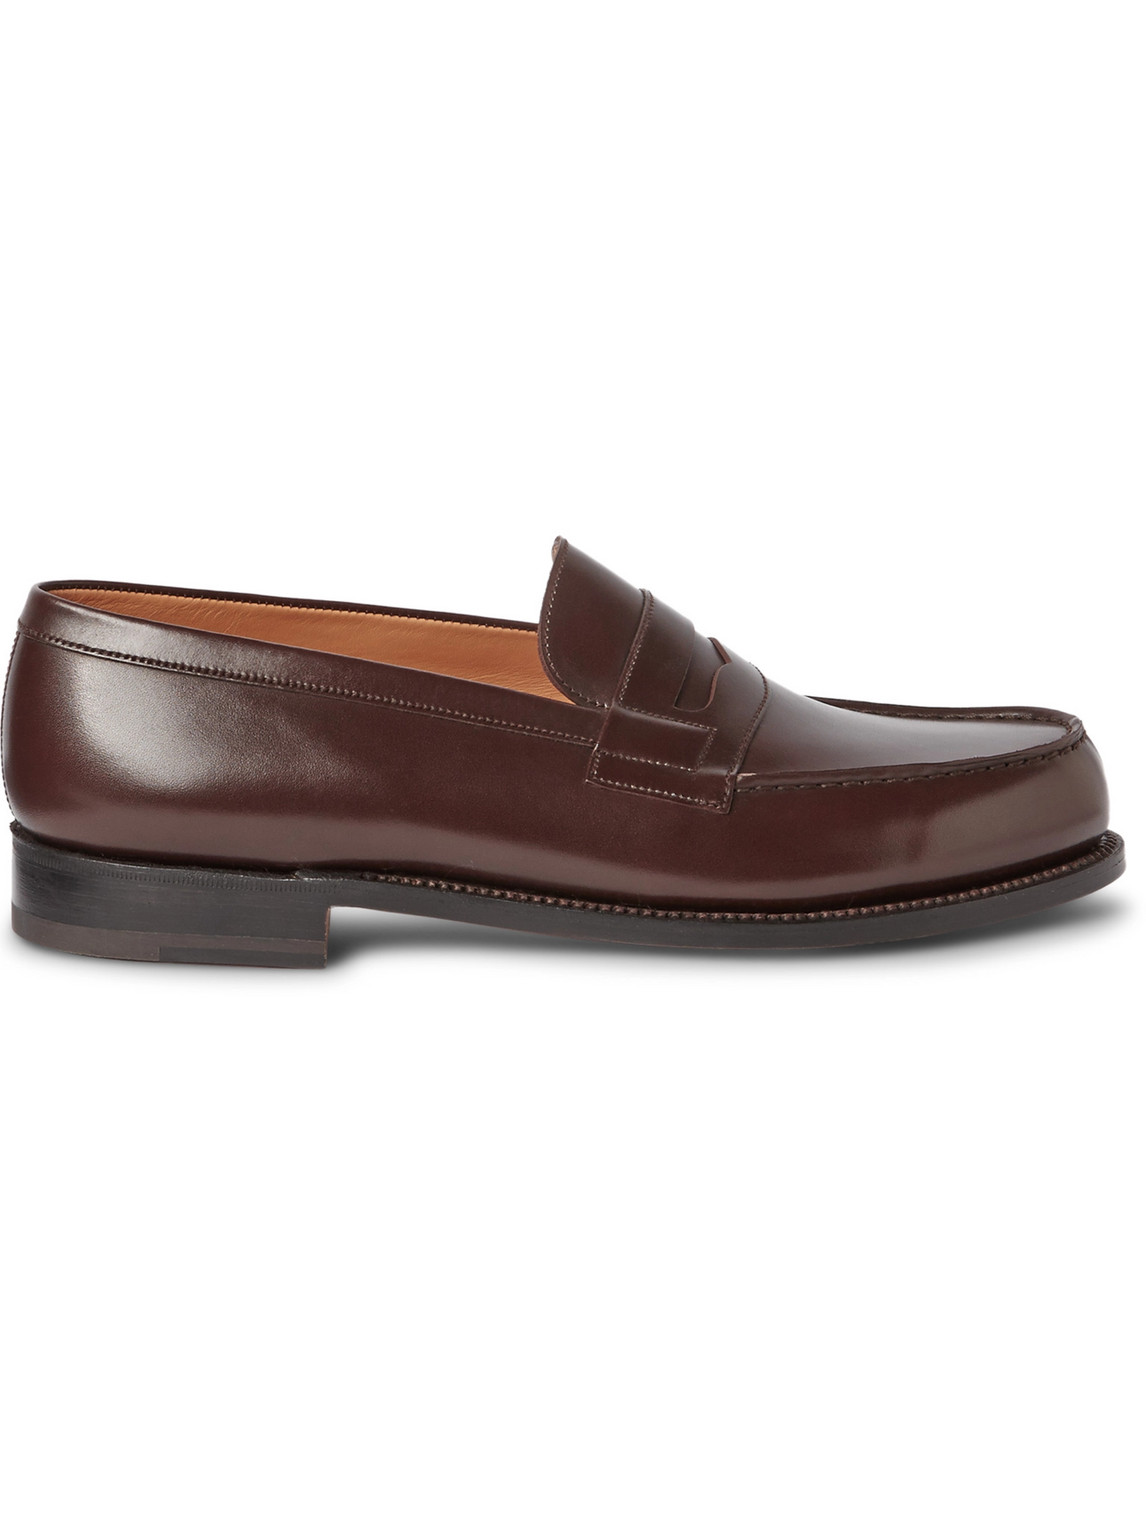 Jm Weston 180 Moccasin Leather Loafers In Brown